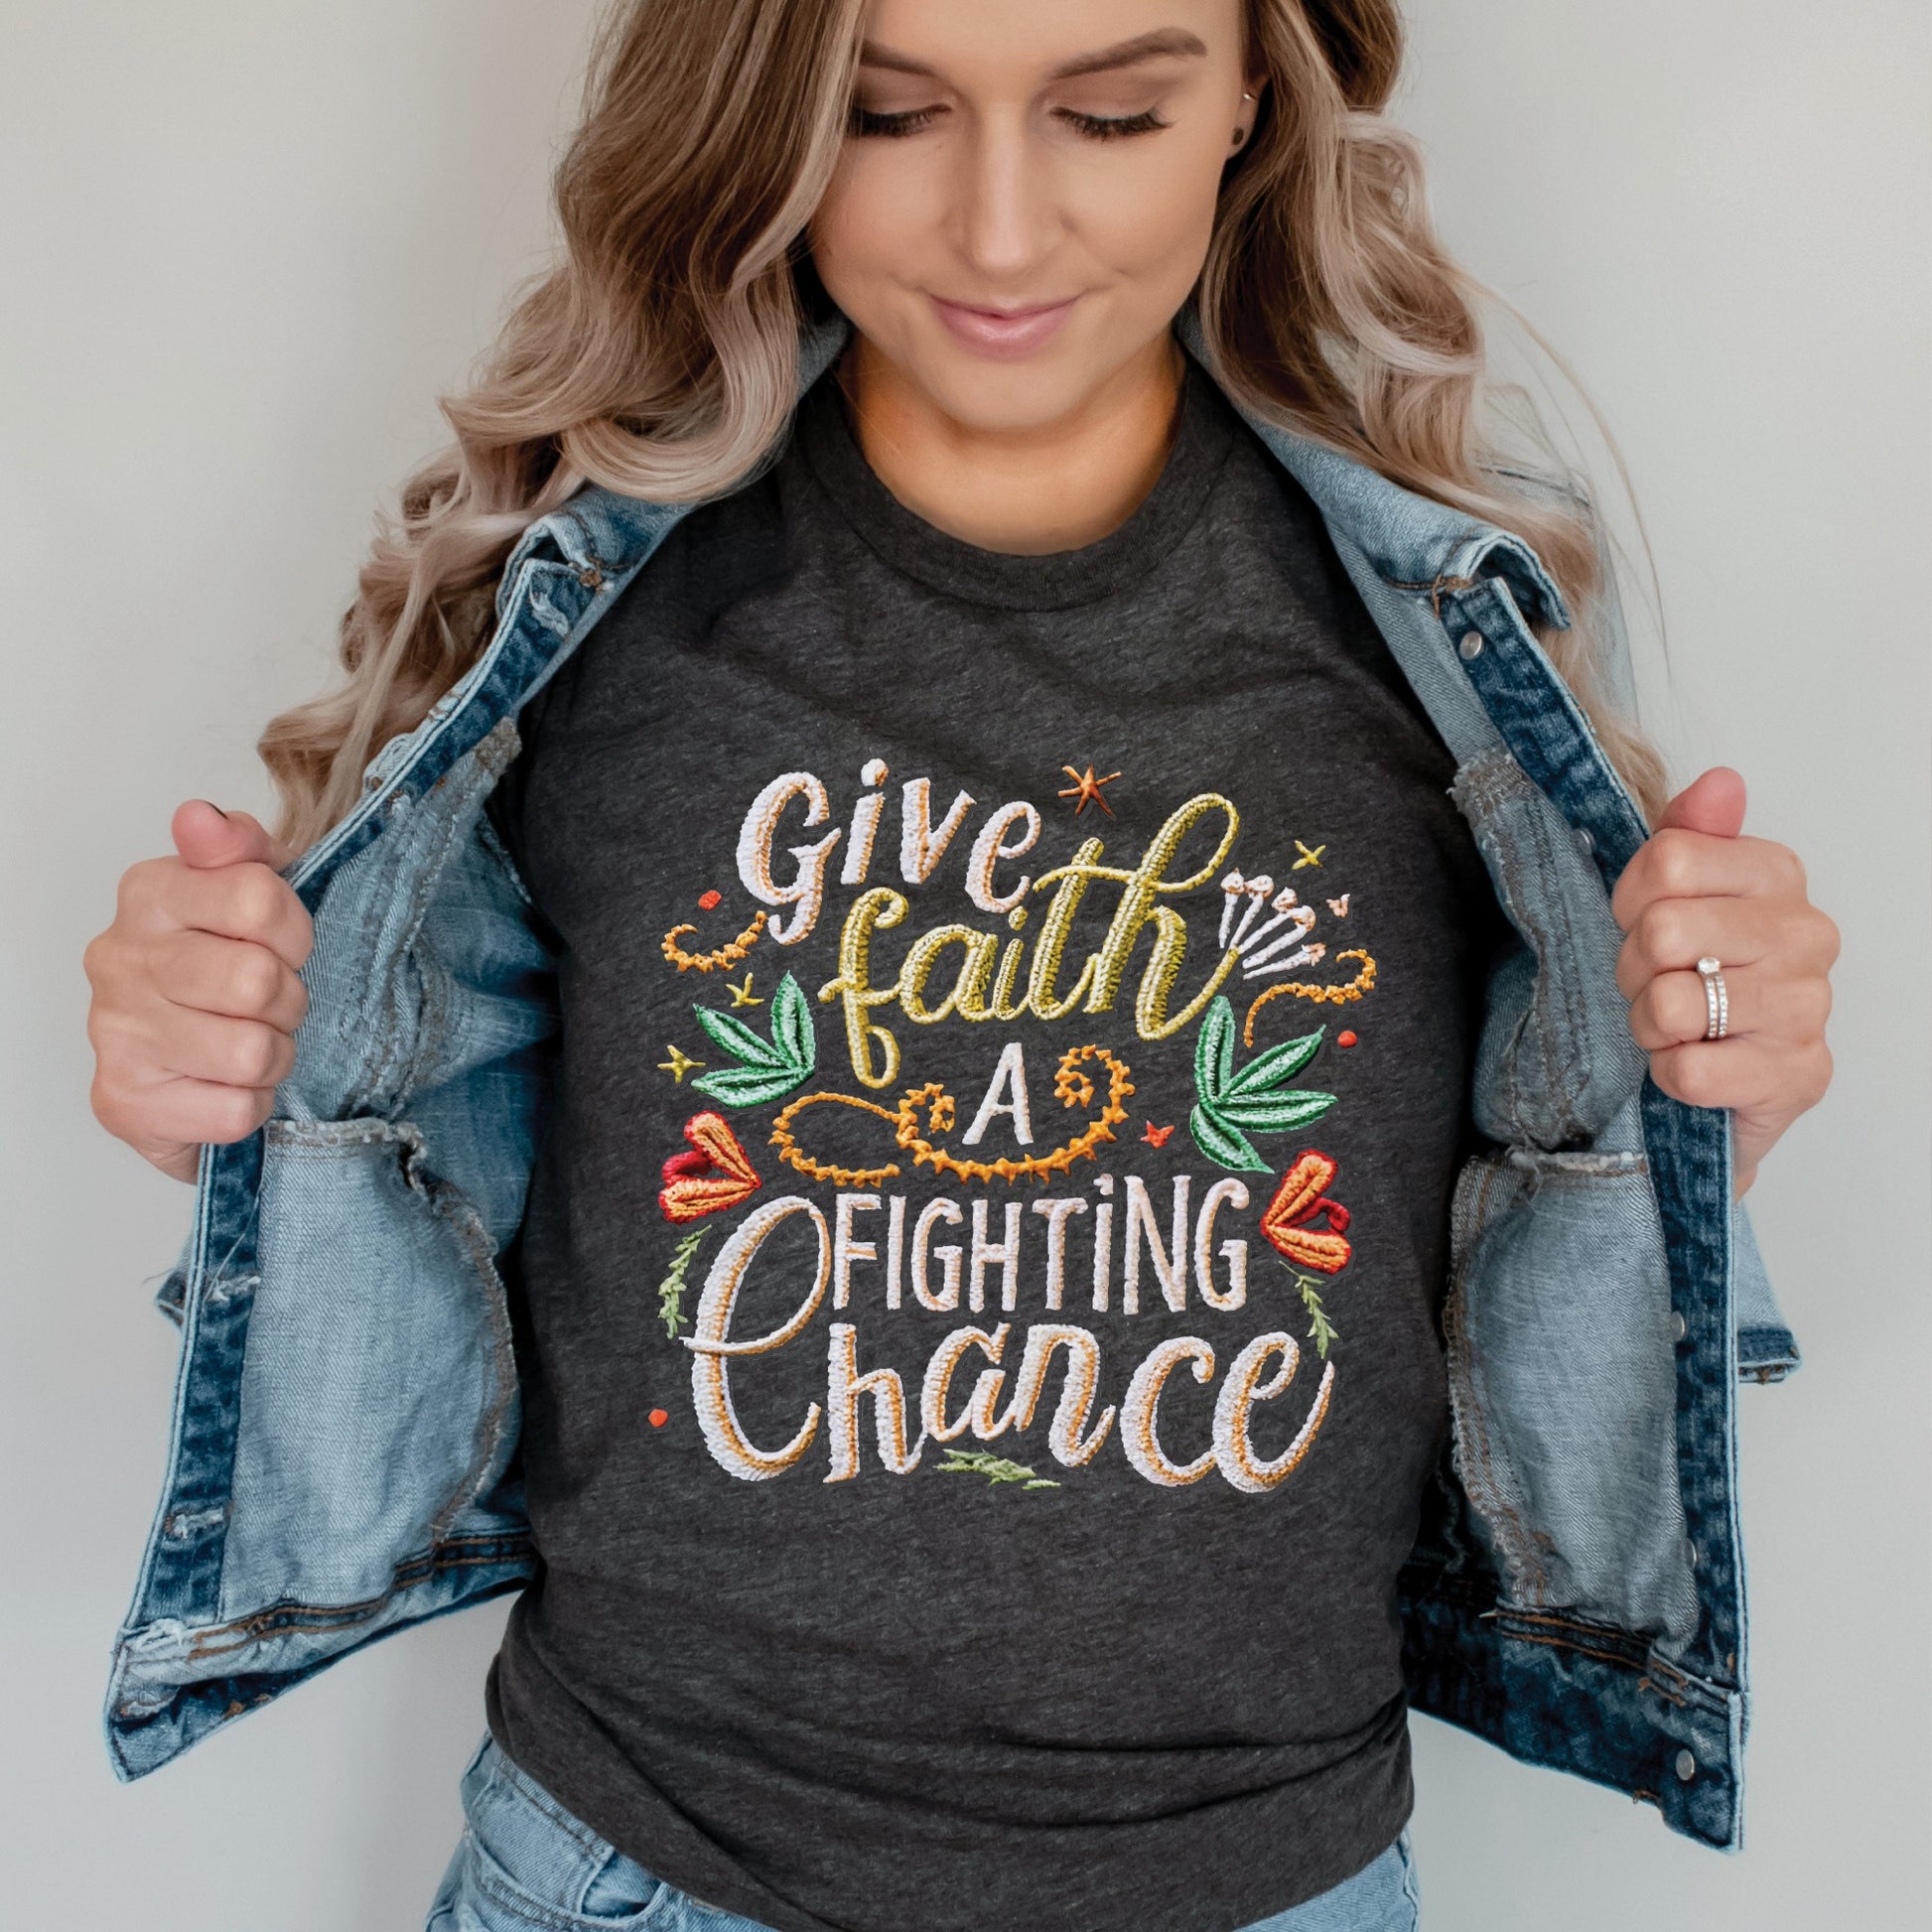 Trendy young woman wearing a heather dark gray t-shirt with printed embroidery font Christian Bible verse quote that says, "Give Faith A Fighting Chance" with flower and leaf graphics, faith-based t-shirt designed for women